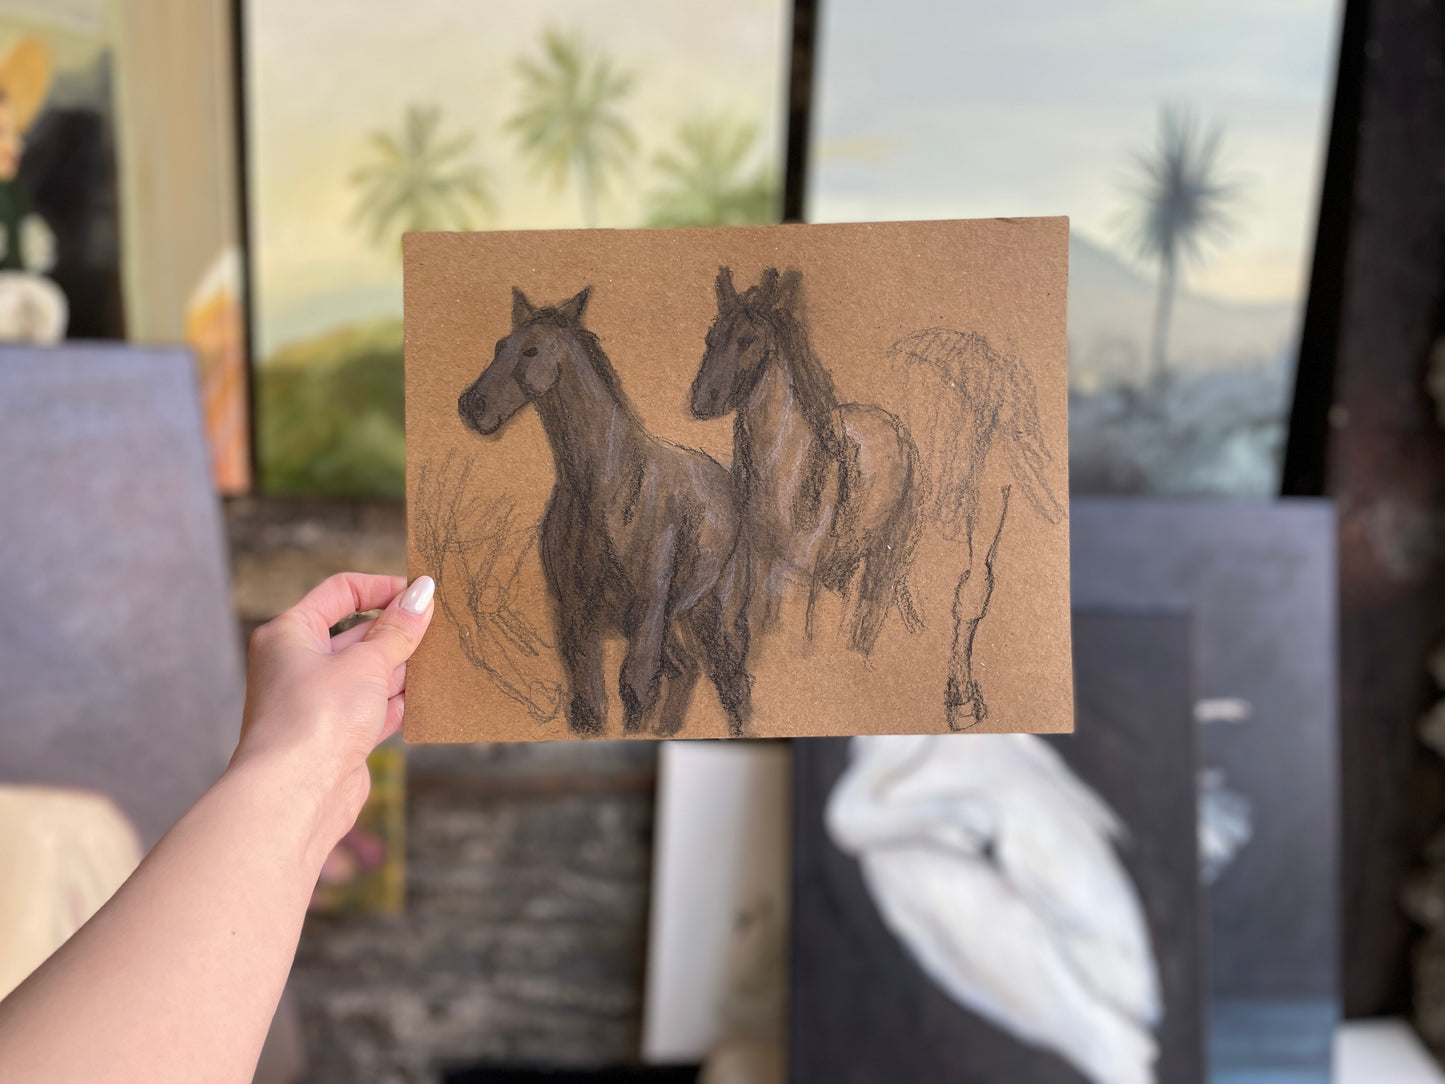 Charcoal Sketch of Galloping Horses